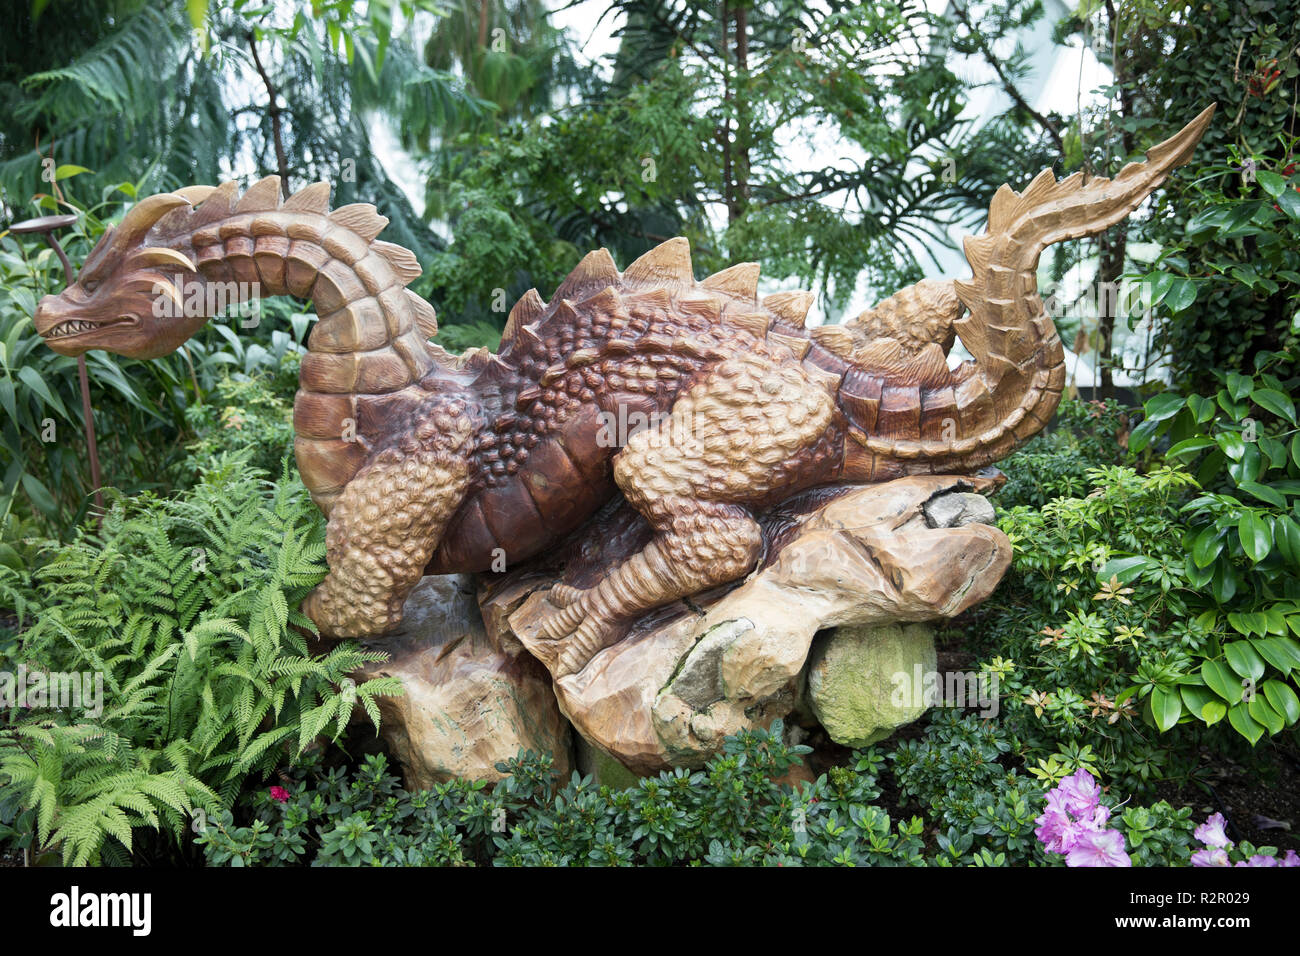 Singapore, Gardens by the Bay, Cloud Forest Dome, Holzskulptur, Drache Stock Photo